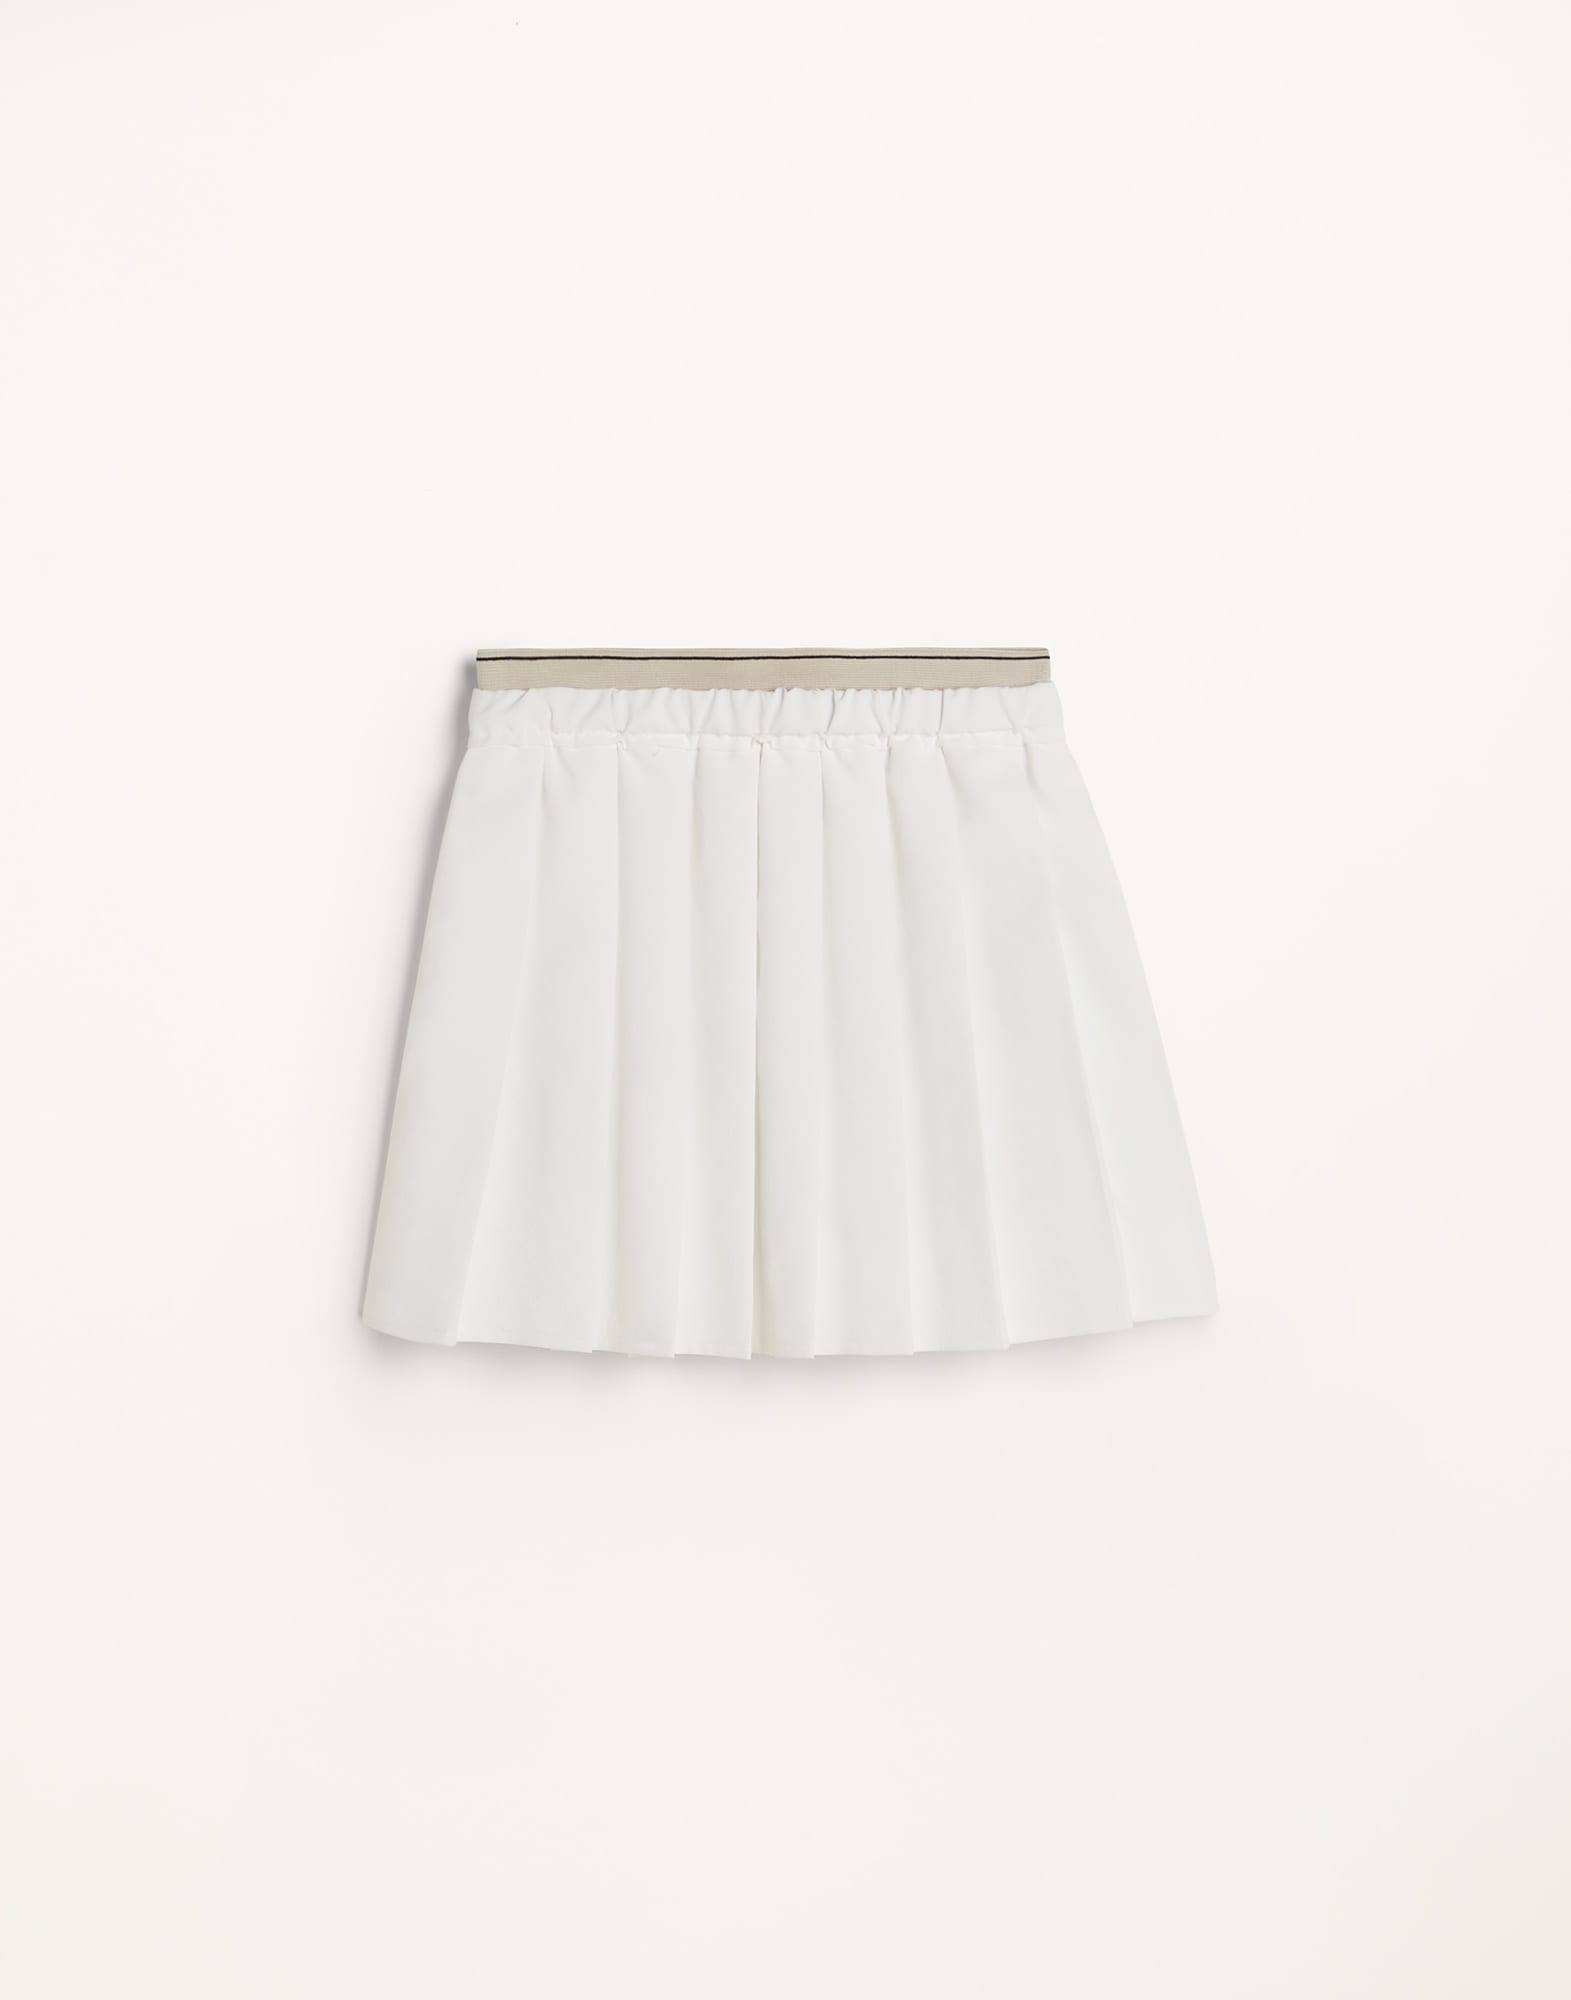 Tennis skirt with shorts